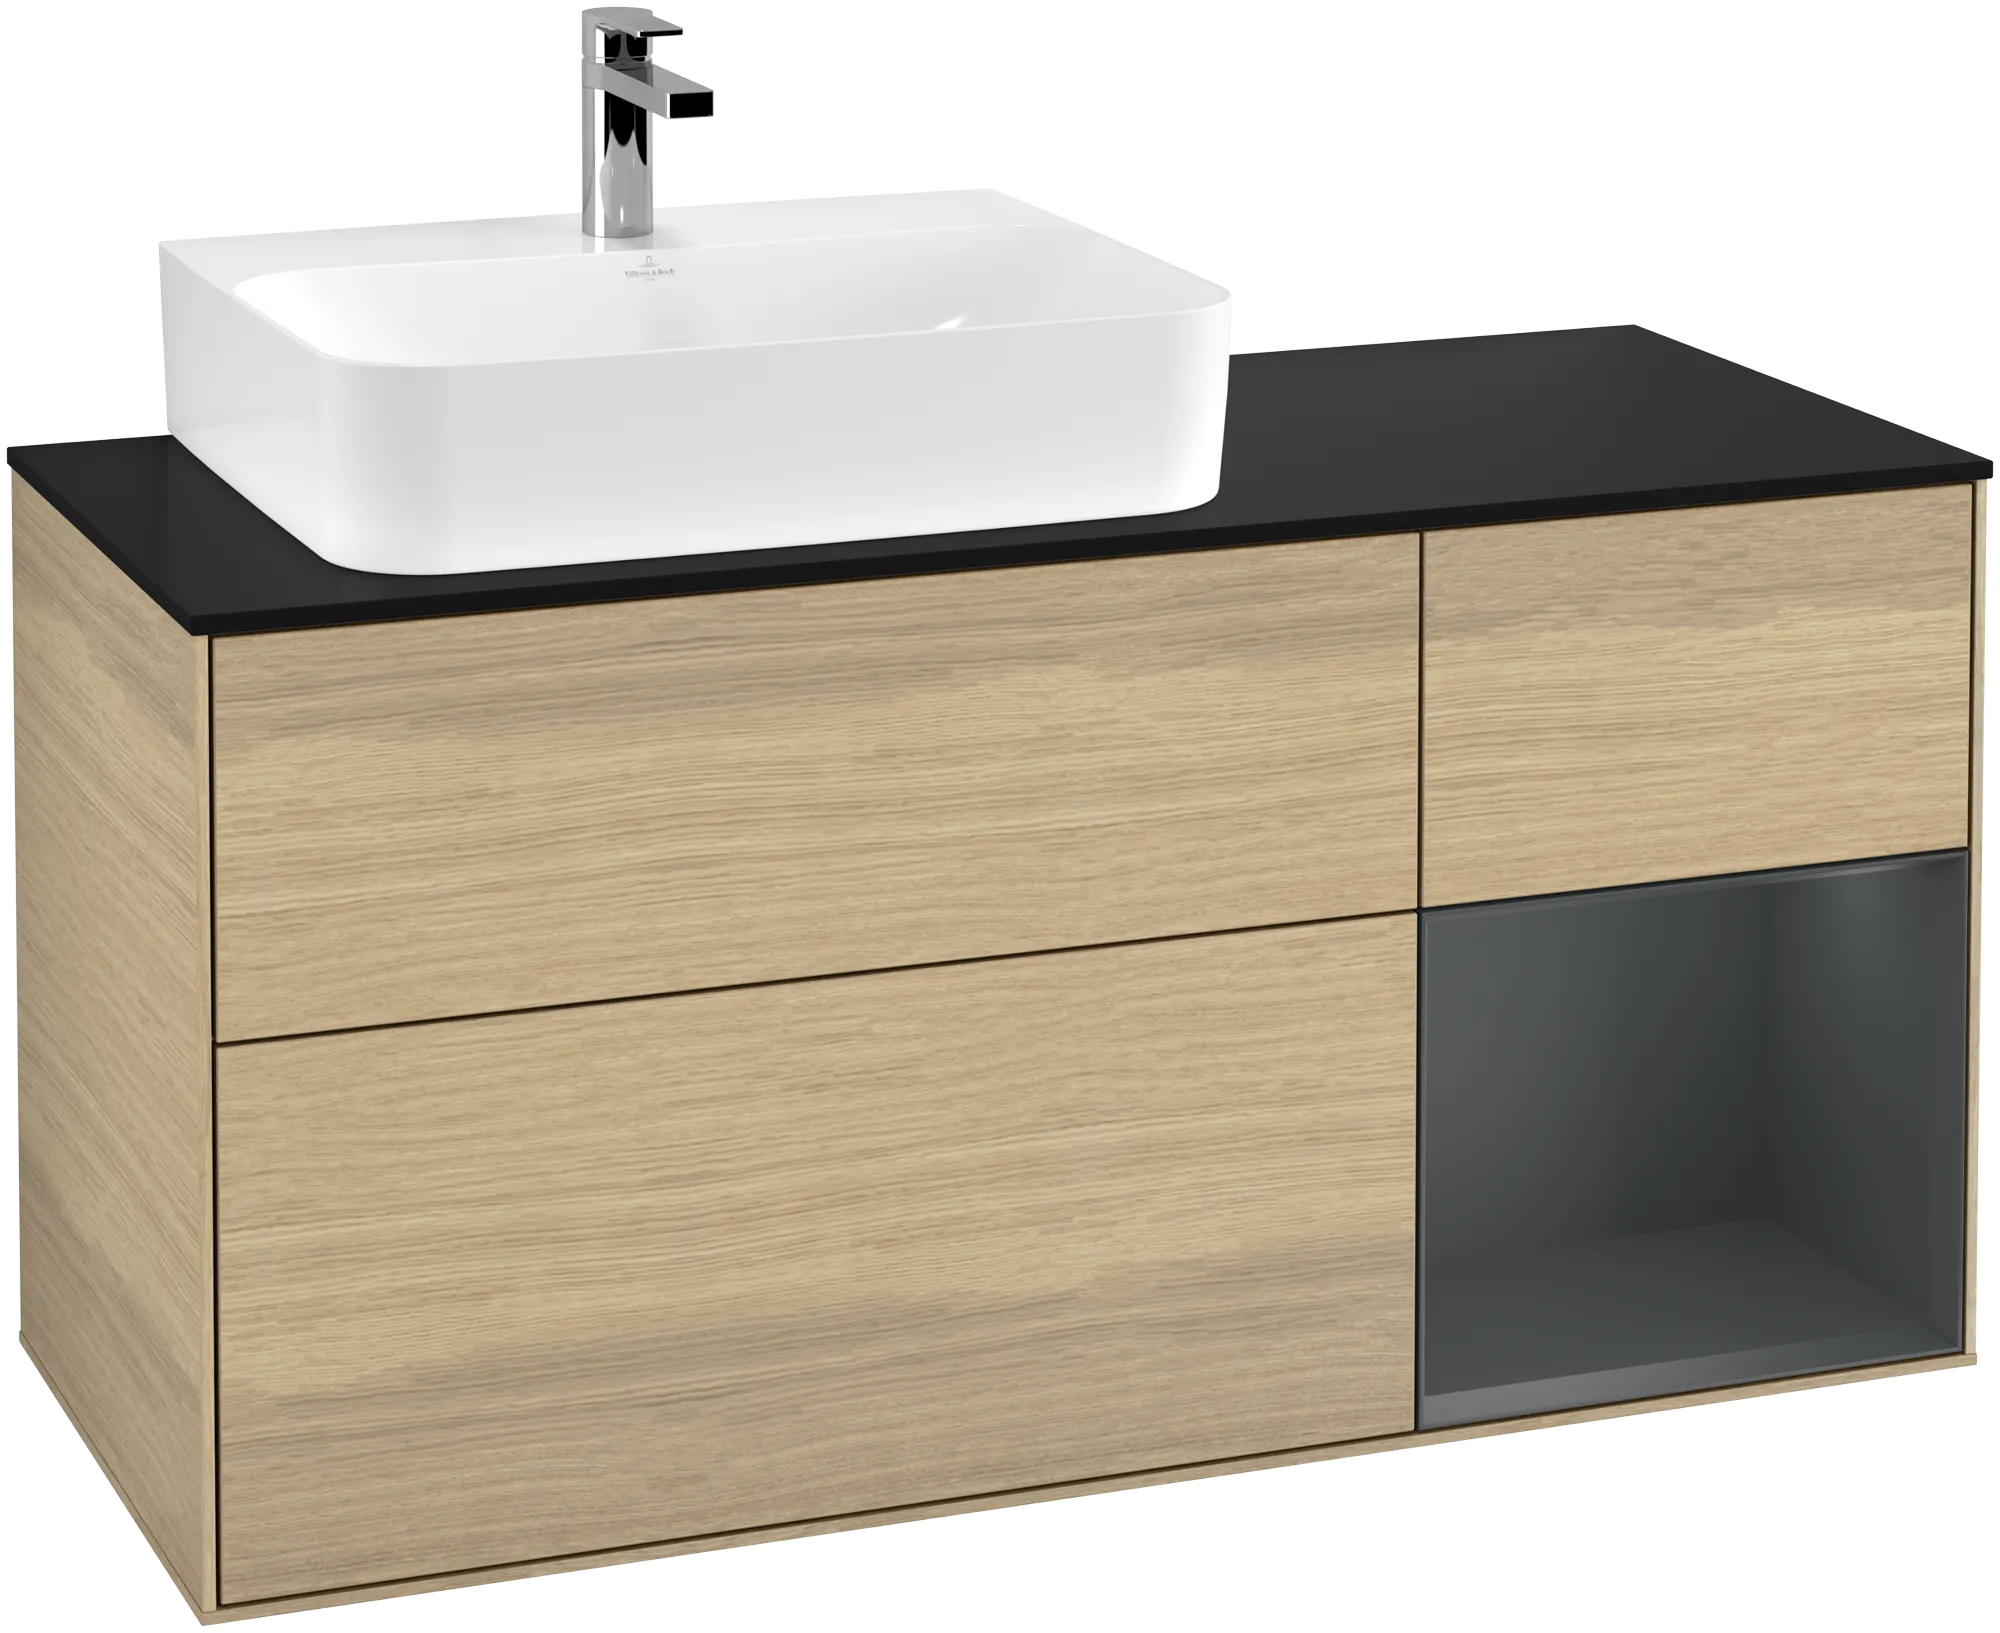 Picture of VILLEROY BOCH Finion Vanity unit, with lighting, 3 pull-out compartments, 1200 x 603 x 501 mm, Oak Veneer / Midnight Blue Matt Lacquer / Glass Black Matt #G152HGPC